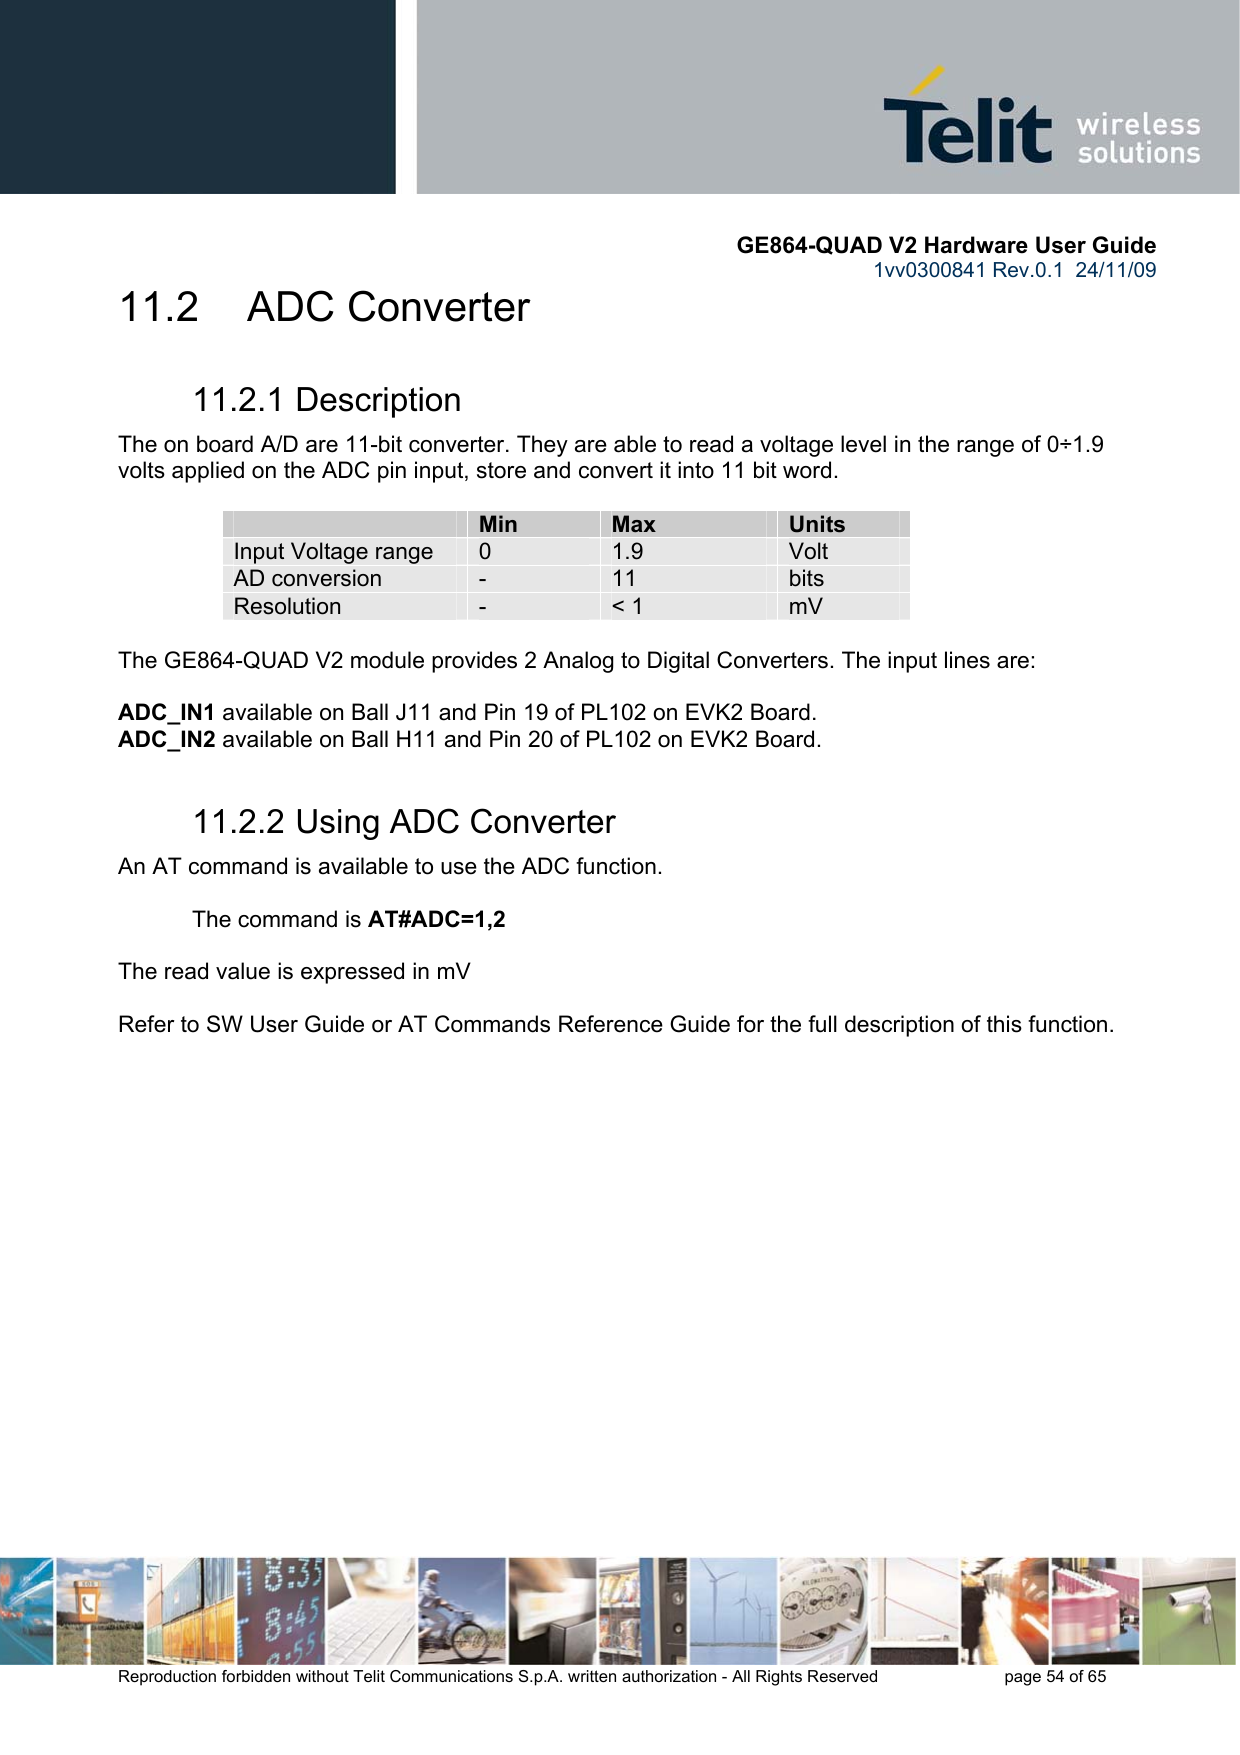       GE864-QUAD V2 Hardware User Guide 1vv0300841 Rev.0.1  24/11/09      Reproduction forbidden without Telit Communications S.p.A. written authorization - All Rights Reserved    page 54 of 65  11.2     ADC Converter 11.2.1 Description The on board A/D are 11-bit converter. They are able to read a voltage level in the range of 0÷1.9 volts applied on the ADC pin input, store and convert it into 11 bit word.    Min  Max  Units Input Voltage range  0  1.9  Volt AD conversion  -  11  bits Resolution  -  &lt; 1  mV  The GE864-QUAD V2 module provides 2 Analog to Digital Converters. The input lines are:  ADC_IN1 available on Ball J11 and Pin 19 of PL102 on EVK2 Board. ADC_IN2 available on Ball H11 and Pin 20 of PL102 on EVK2 Board. 11.2.2 Using ADC Converter An AT command is available to use the ADC function.  The command is AT#ADC=1,2  The read value is expressed in mV  Refer to SW User Guide or AT Commands Reference Guide for the full description of this function.     